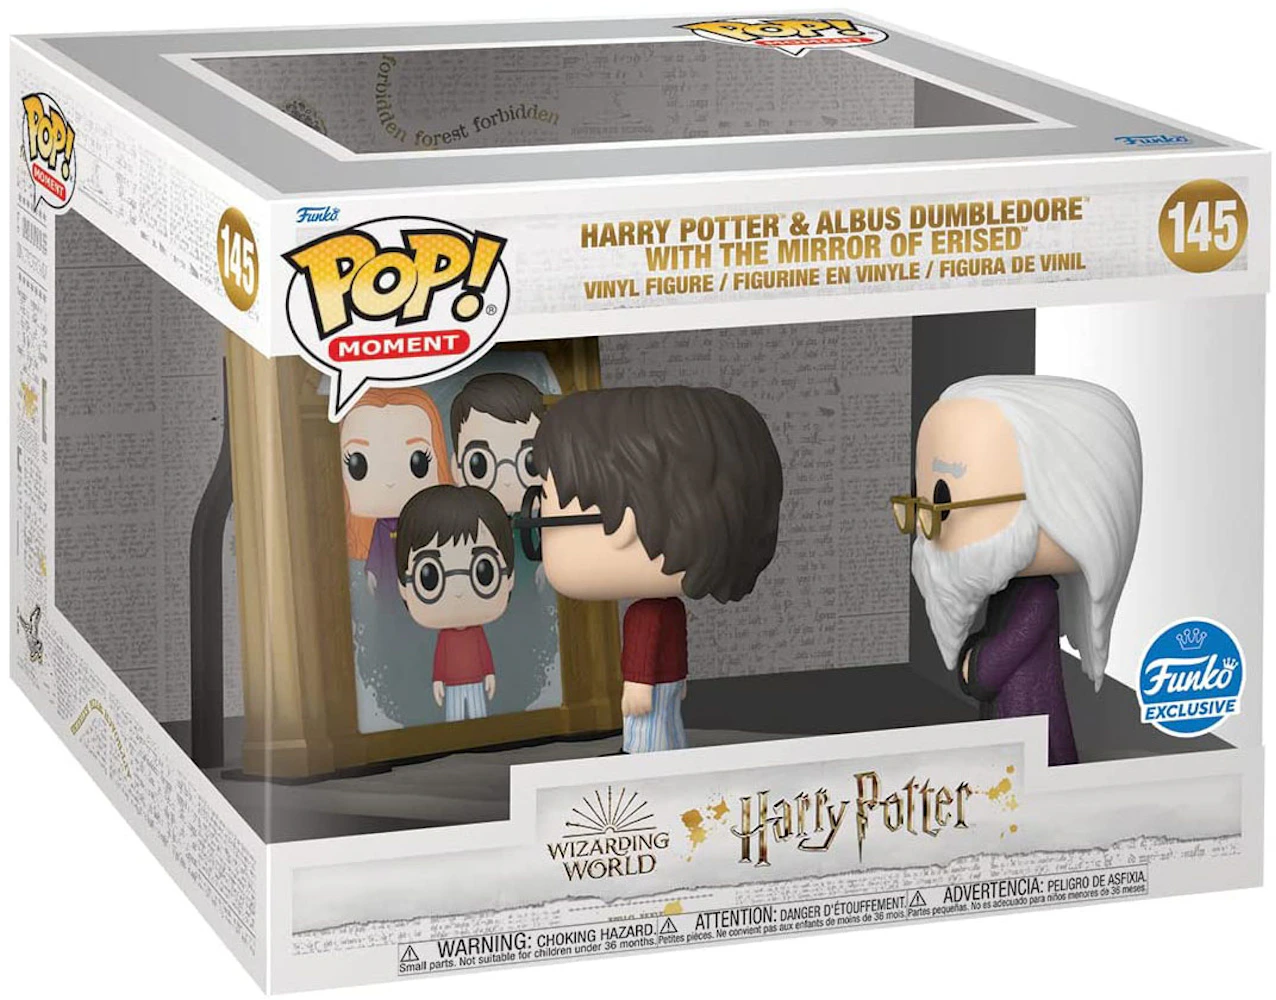 Funko Pop! Moment Harry Potter & Albus Dumbledore with the Mirror